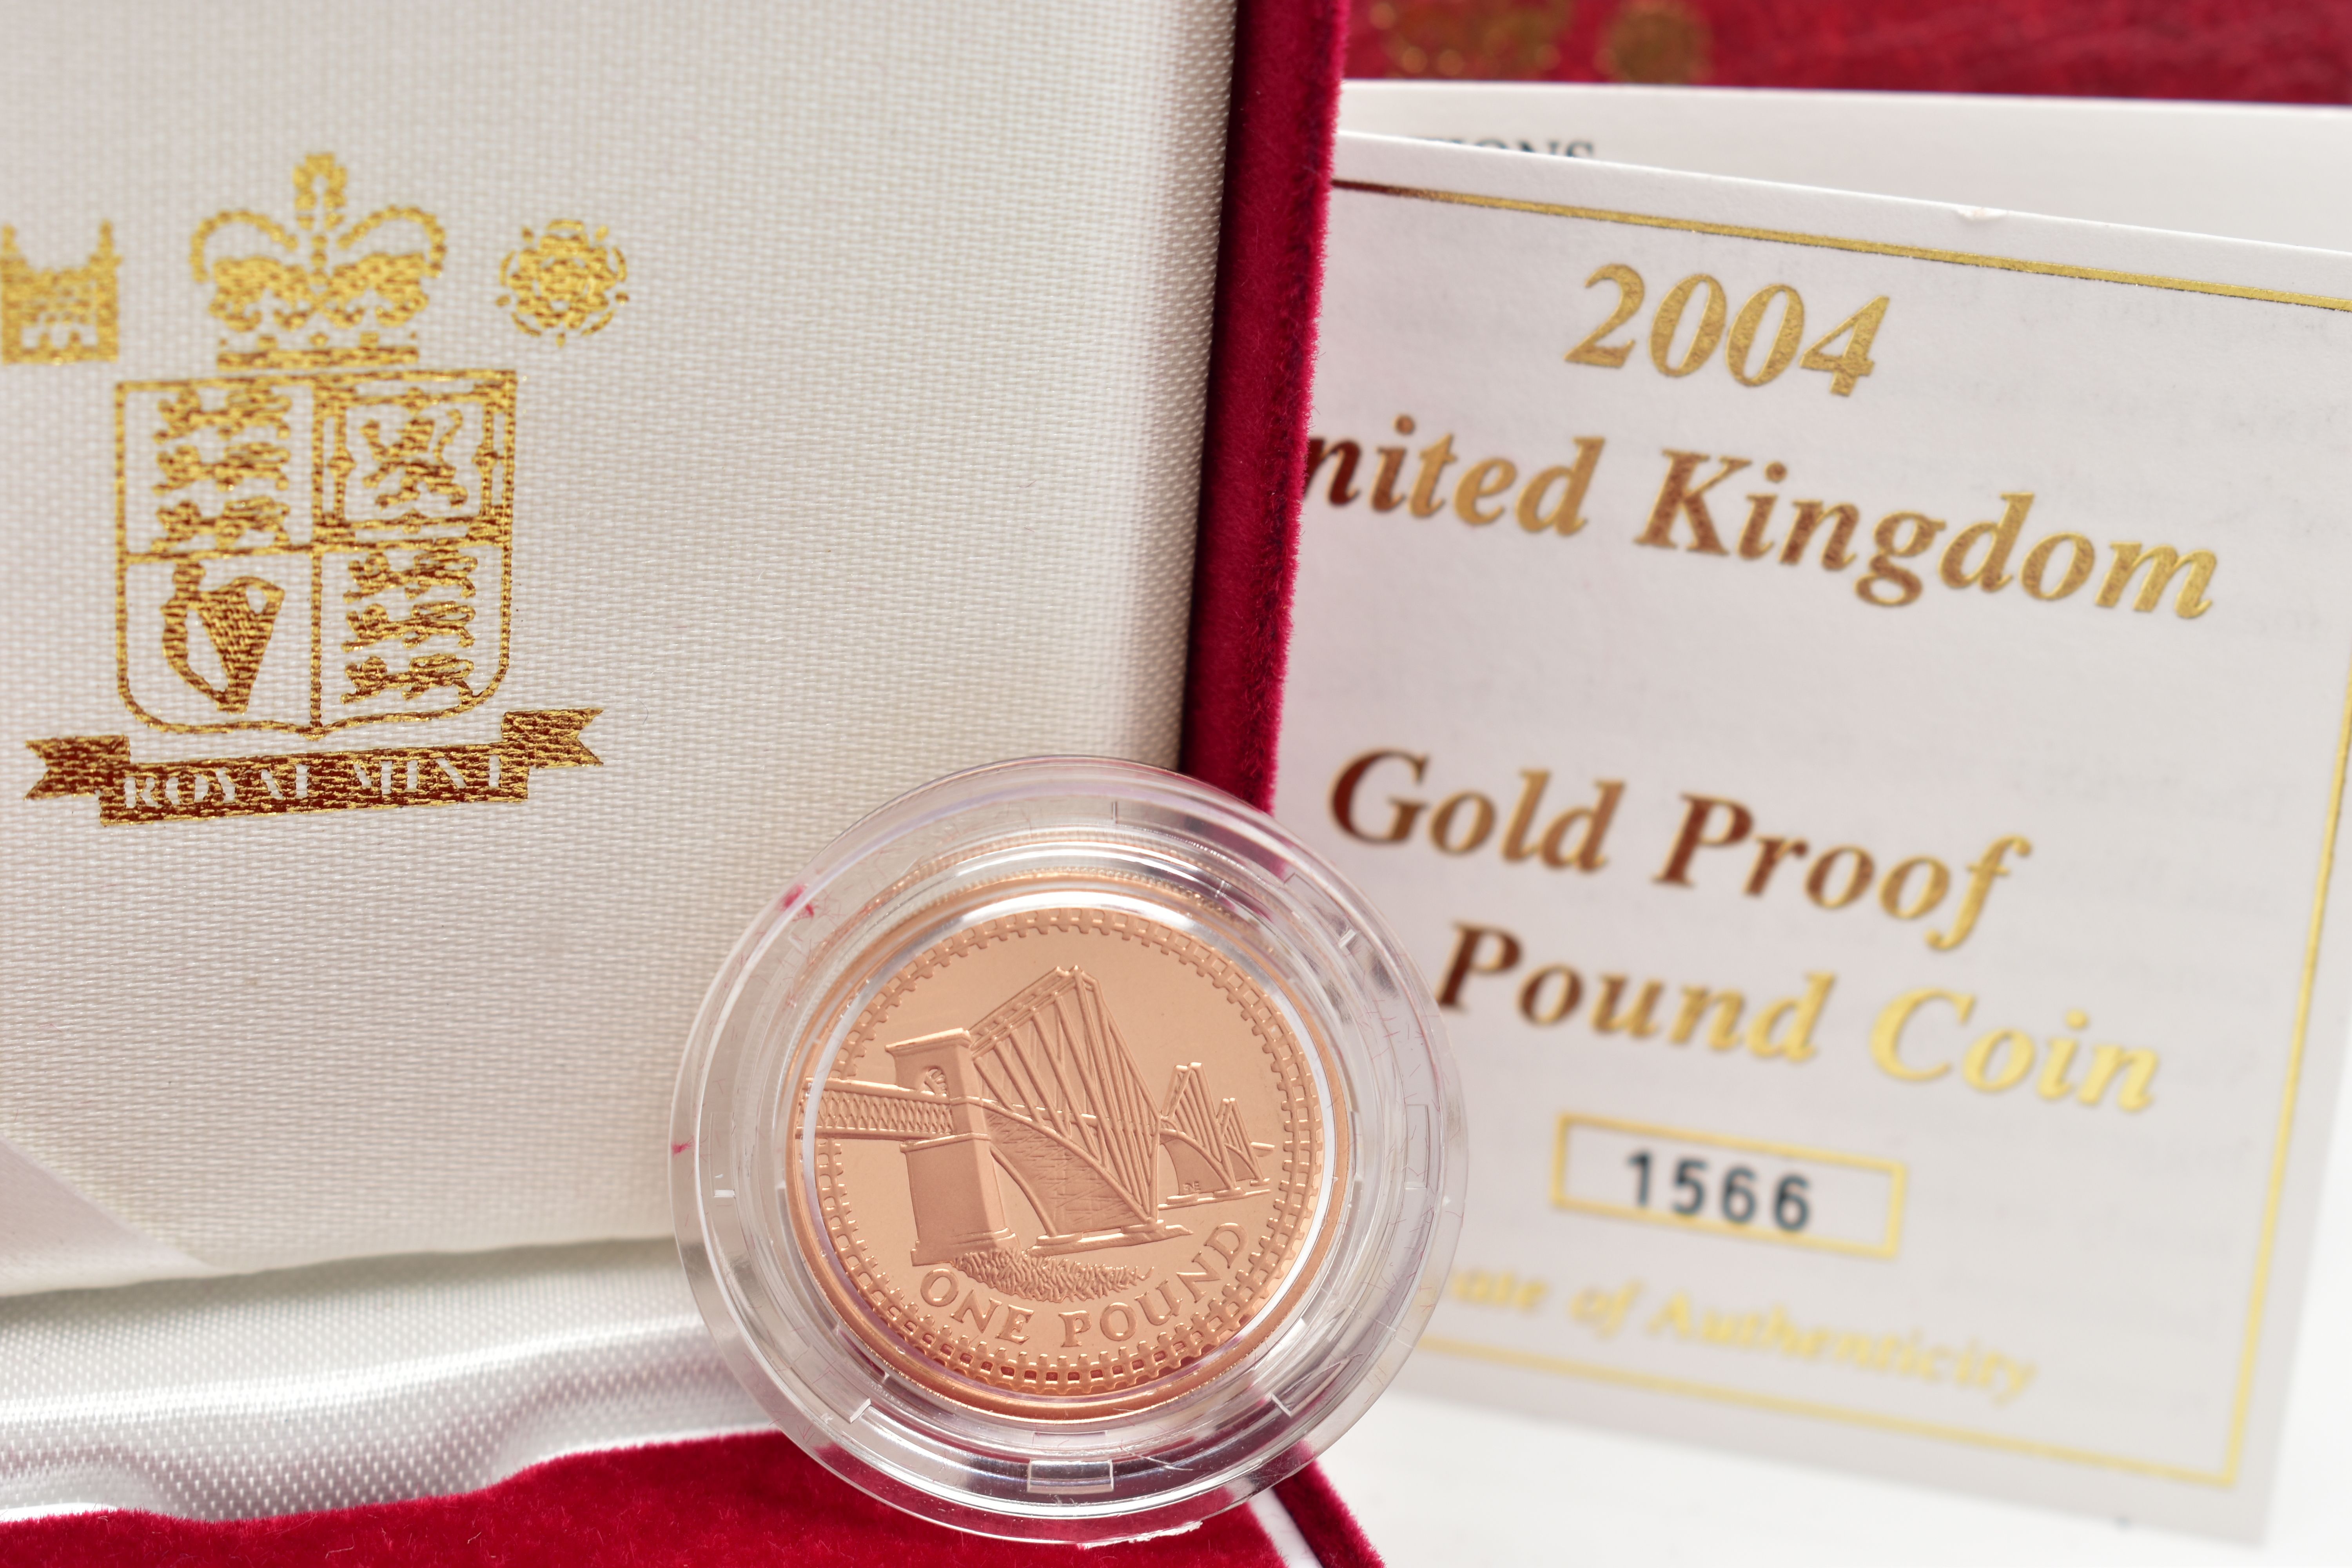 A ROYAL MINT 2004 UNITED KINGDOM GOLD PROOF ONE POUND COIN, 19.619 grams, 22.50mm, 916.7 carat gold,